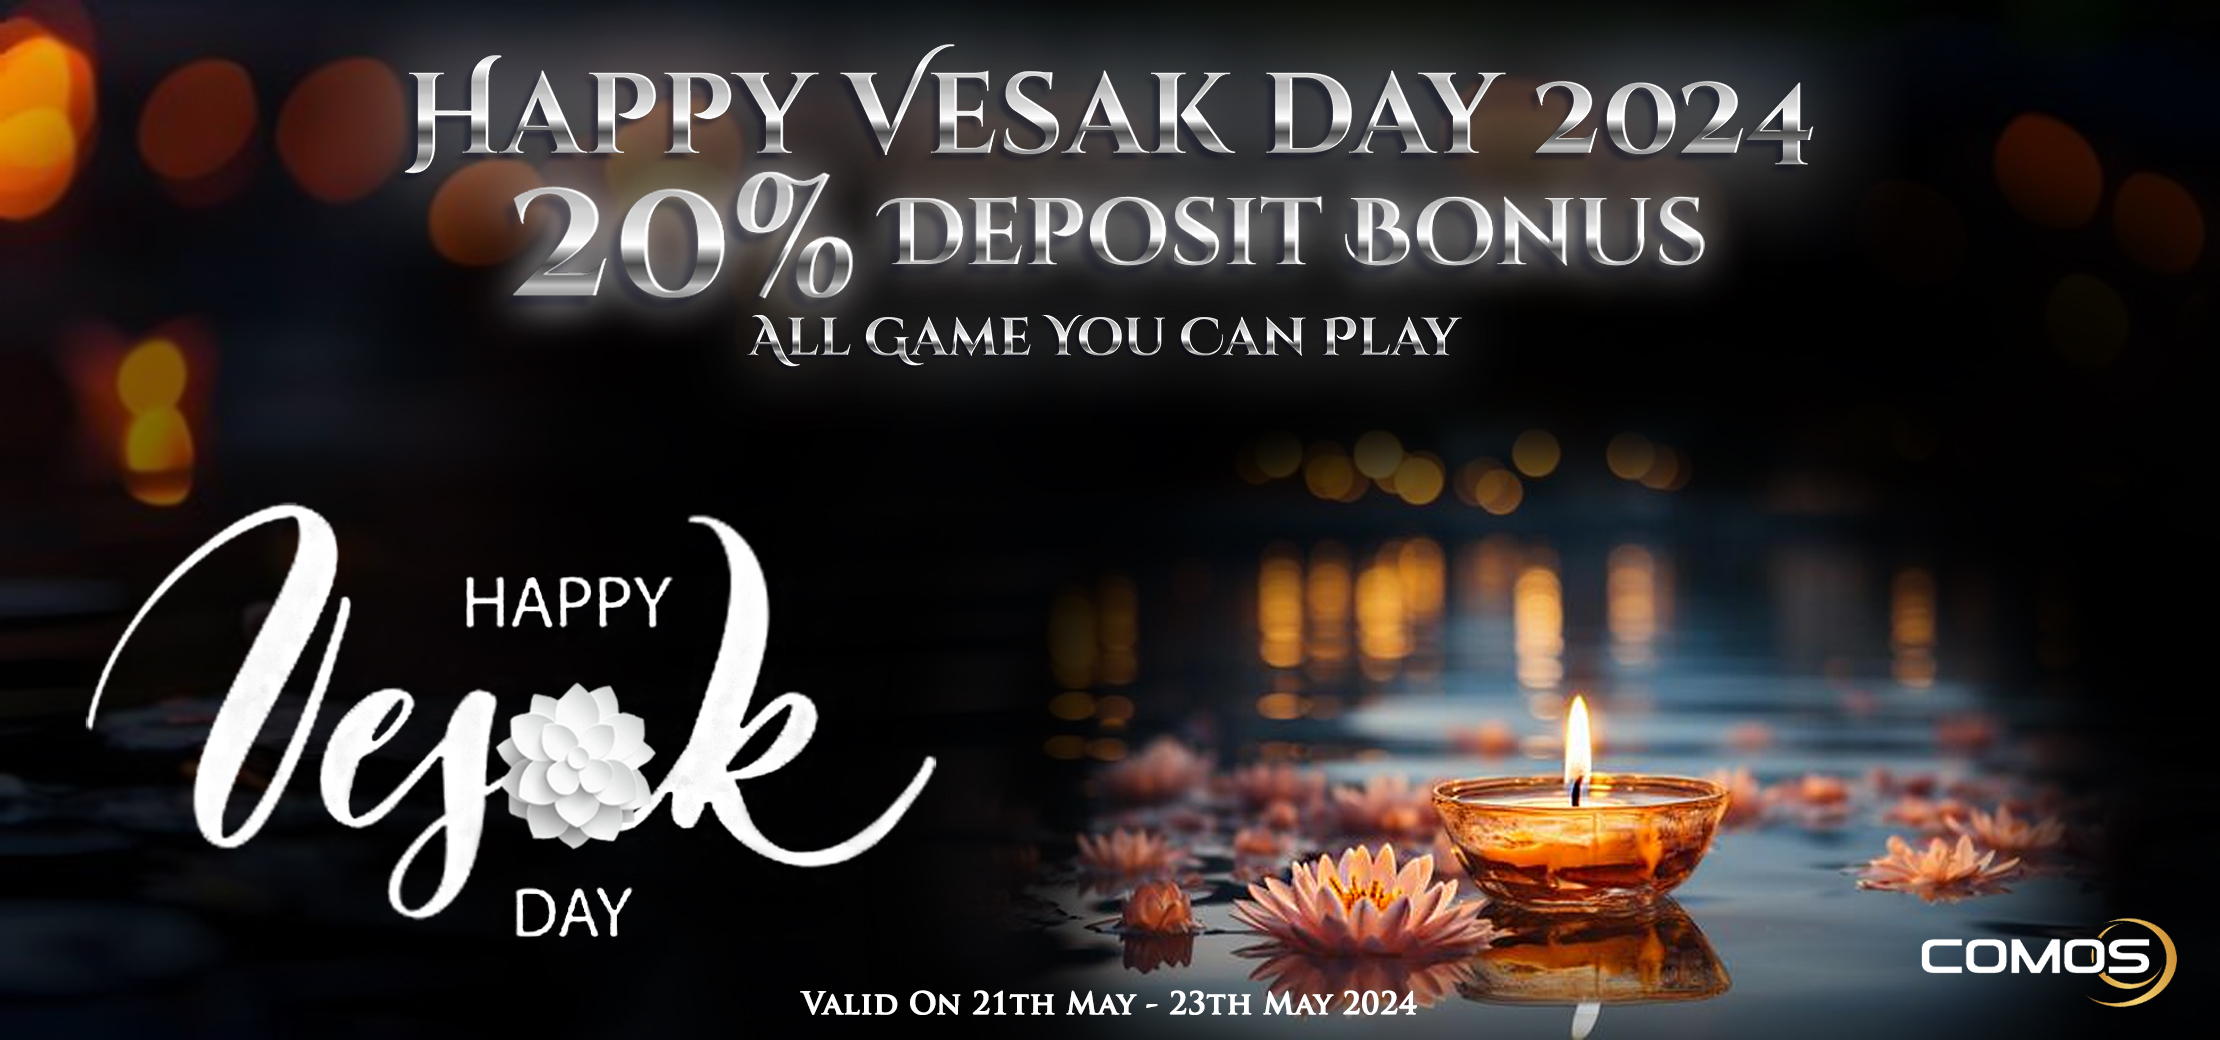 Happy Wesak Day 2024 20% Deposit Bonus All Game You Can Play (Valid On 21th May - 23th May 2024 )